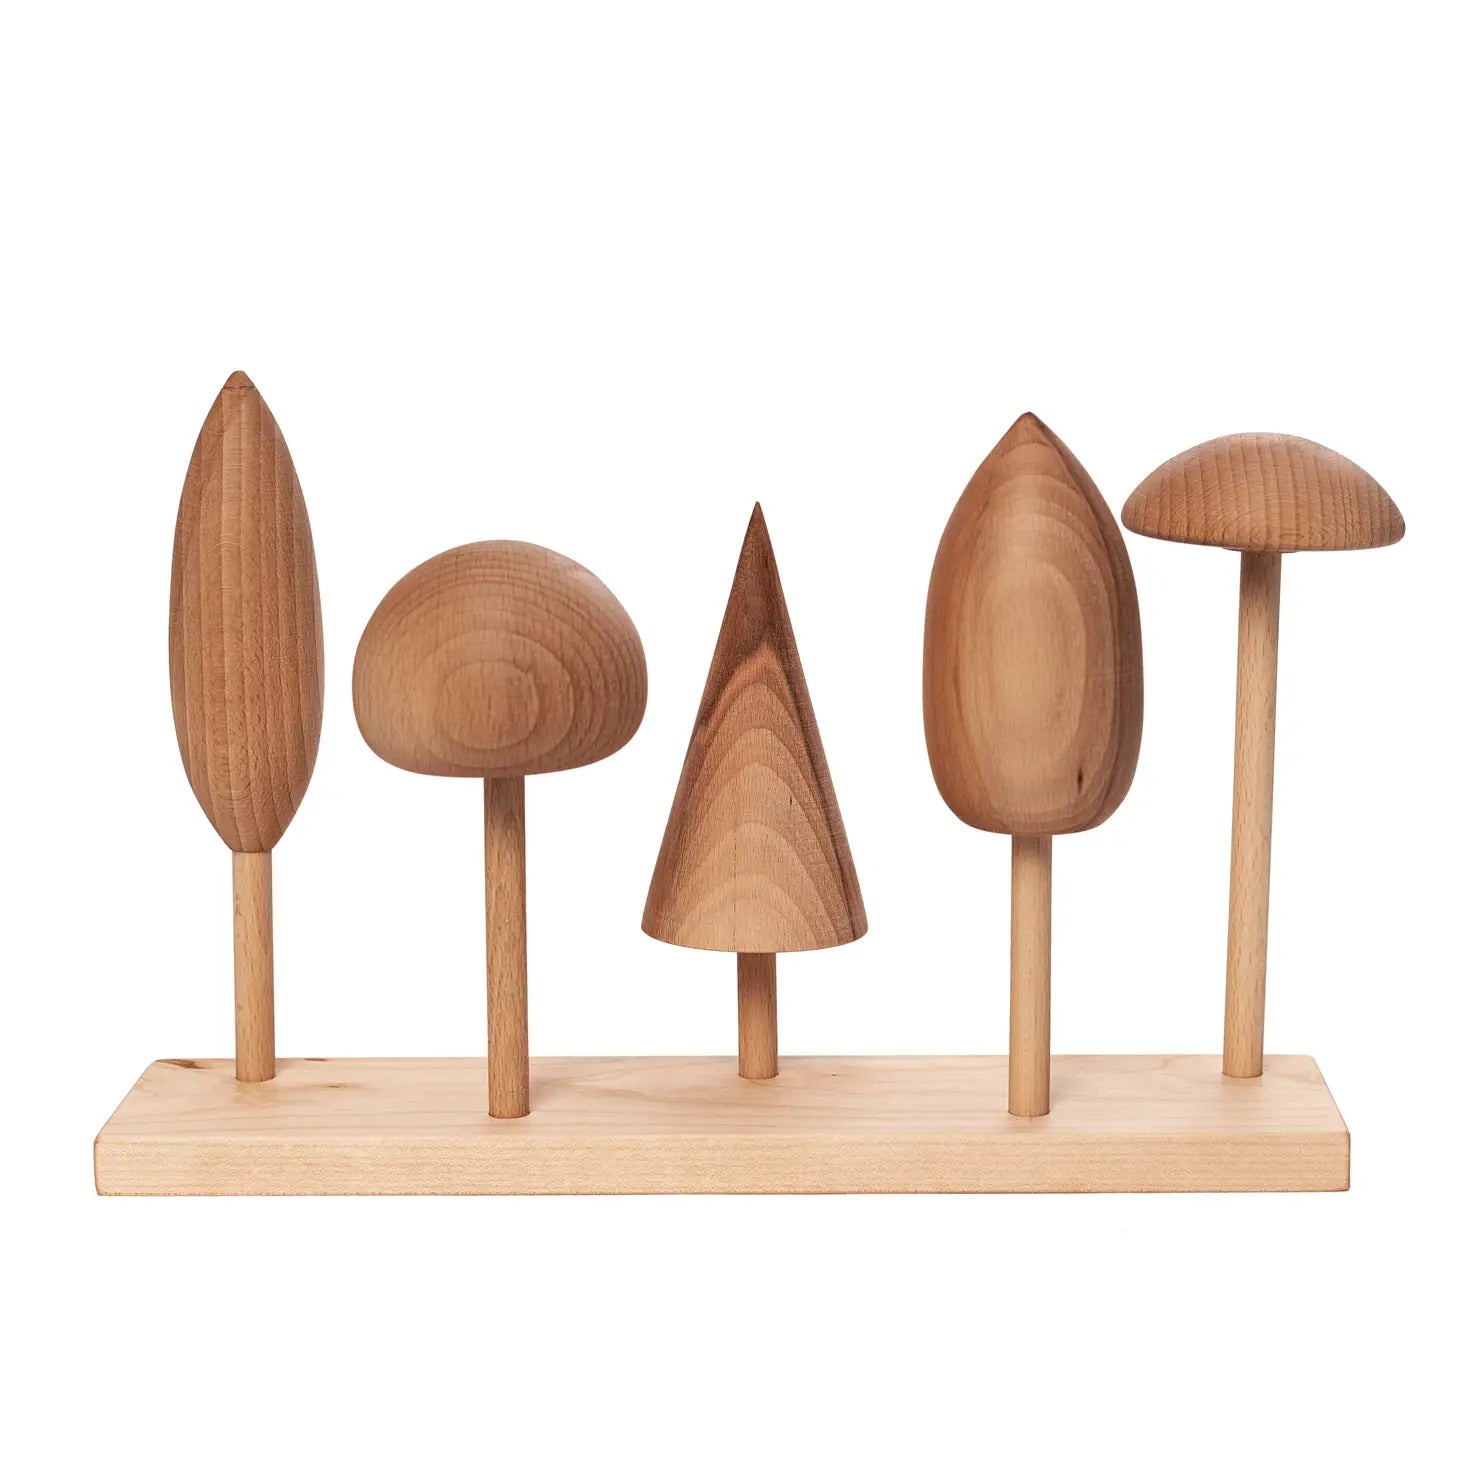 Natural Wooden Stacking Toy - Tree Crowns